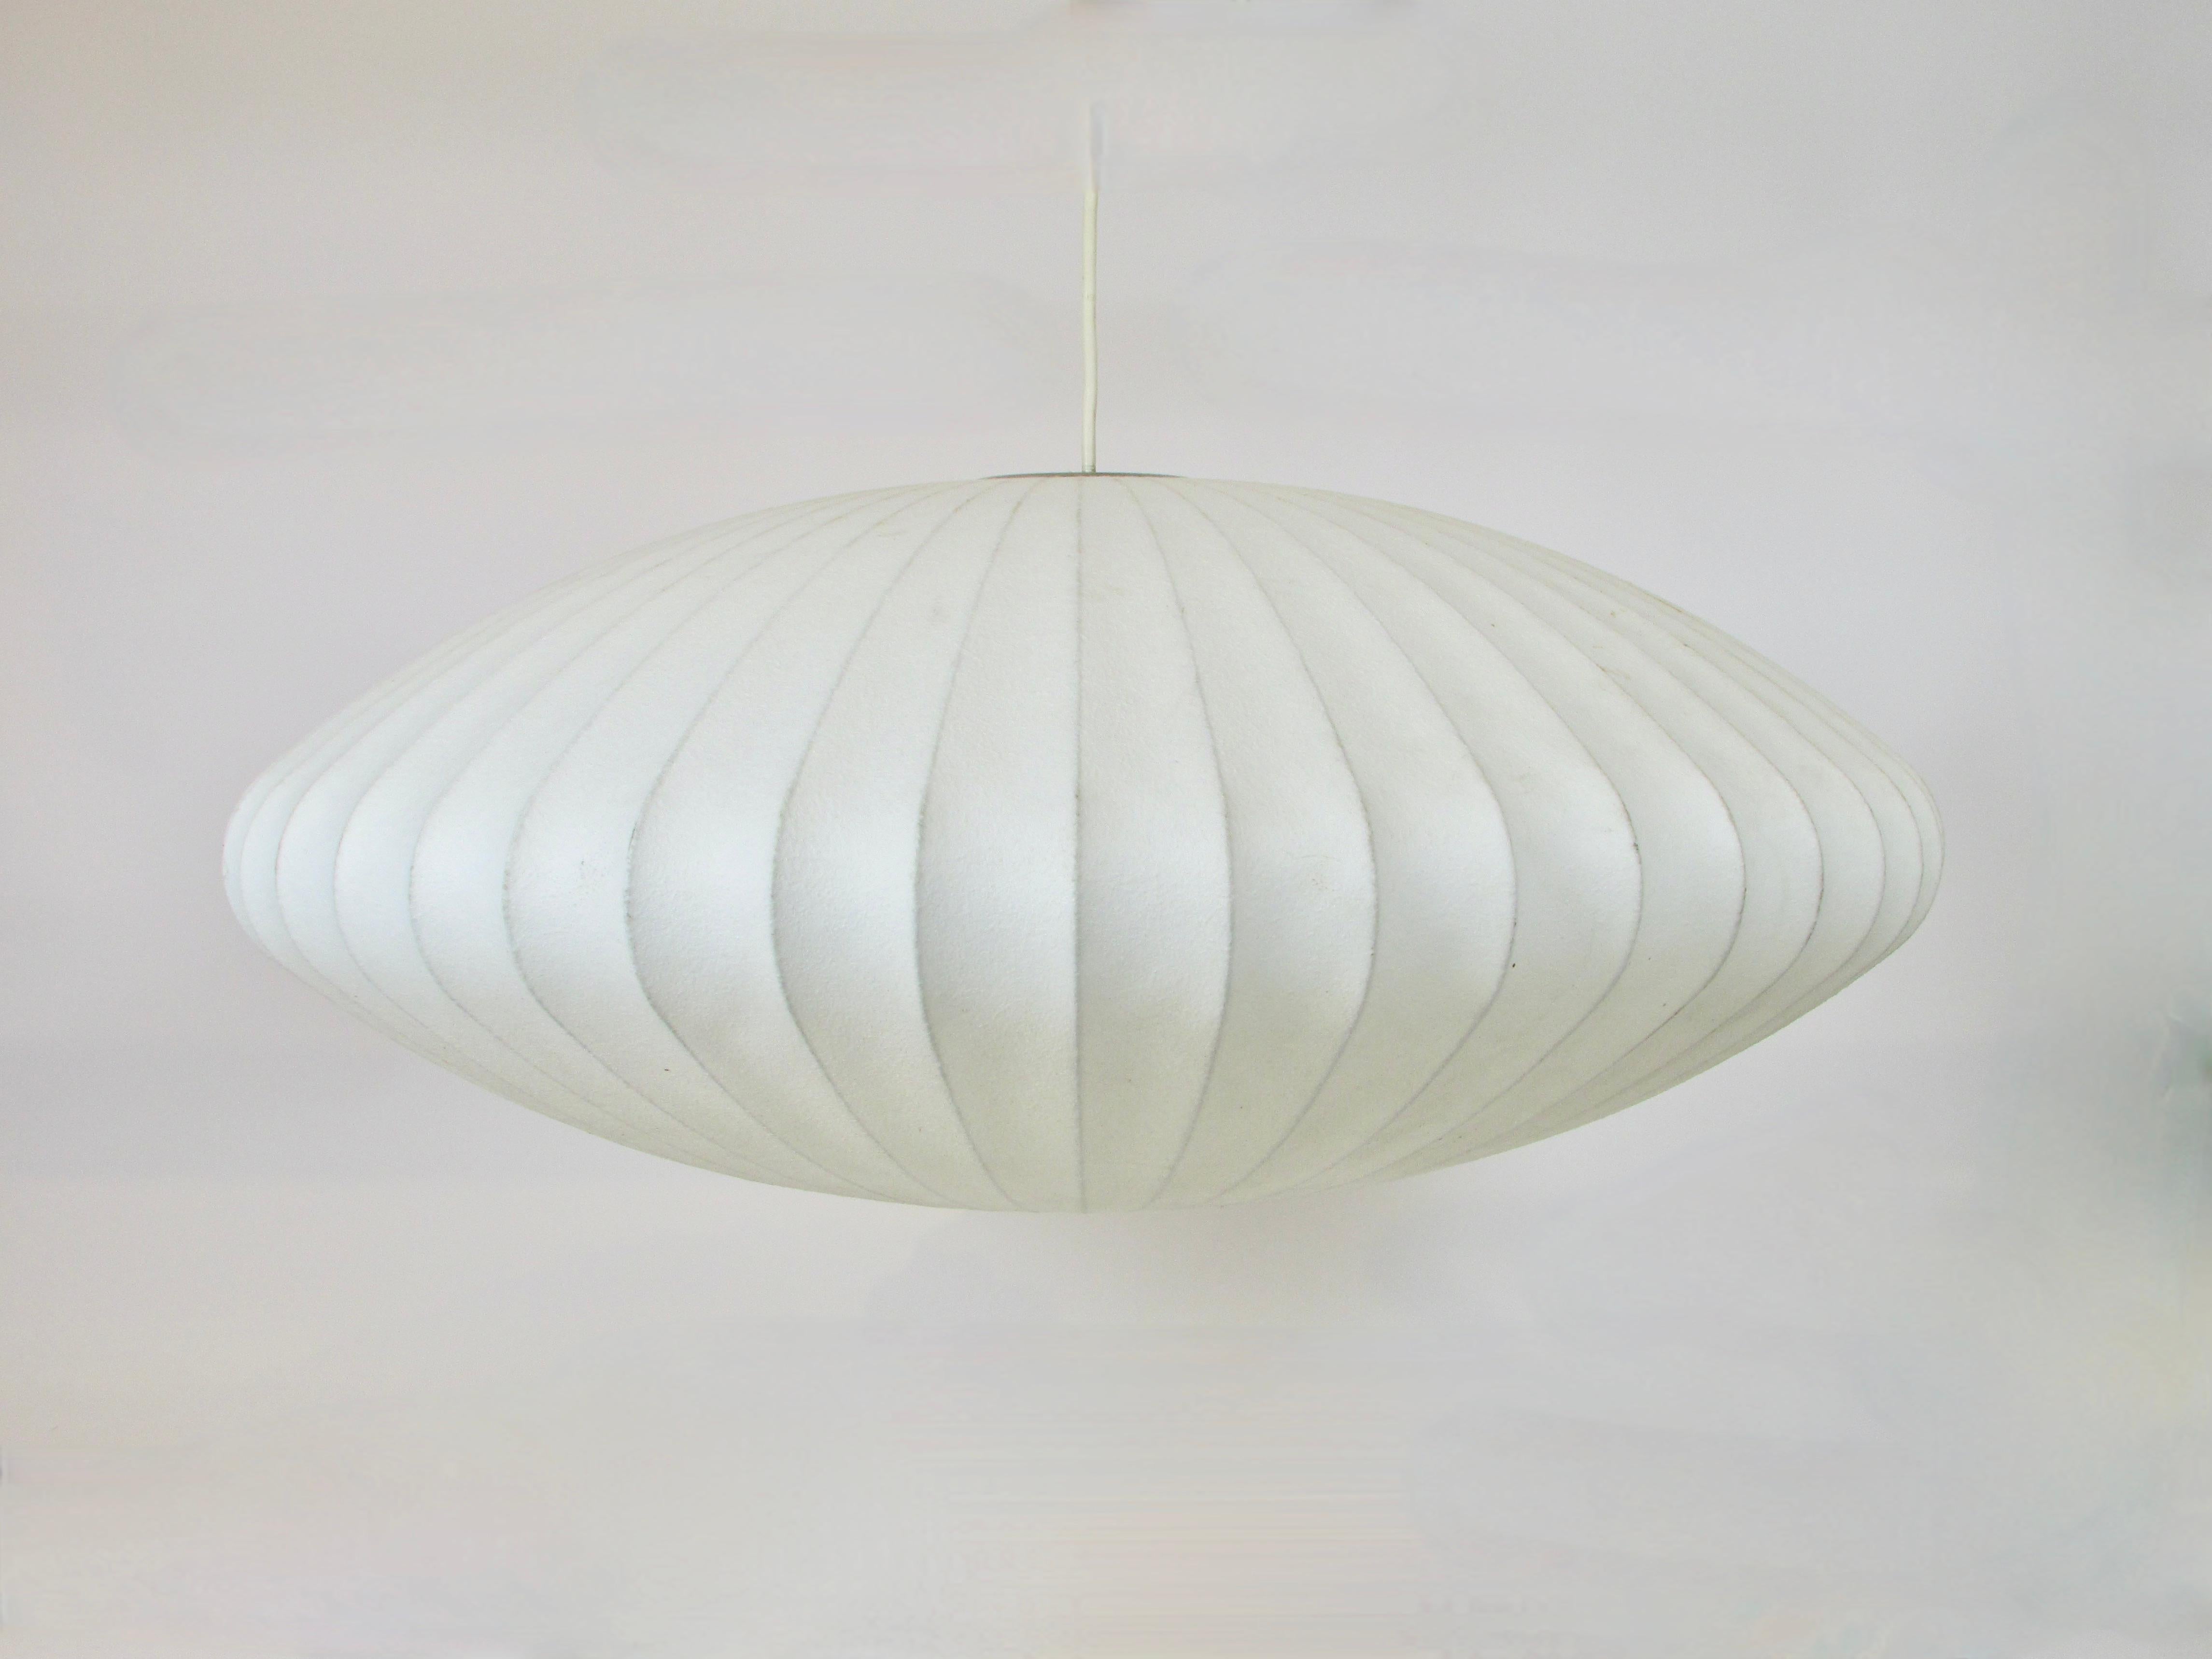 Iconic bubble lamp designed by George Nelson and manufactured by Howard Miller Company in the 1950s. Herman Miller acquired the design in the 1960s and manufactures these to this day. Modernica also started distributing them along the way as well.
